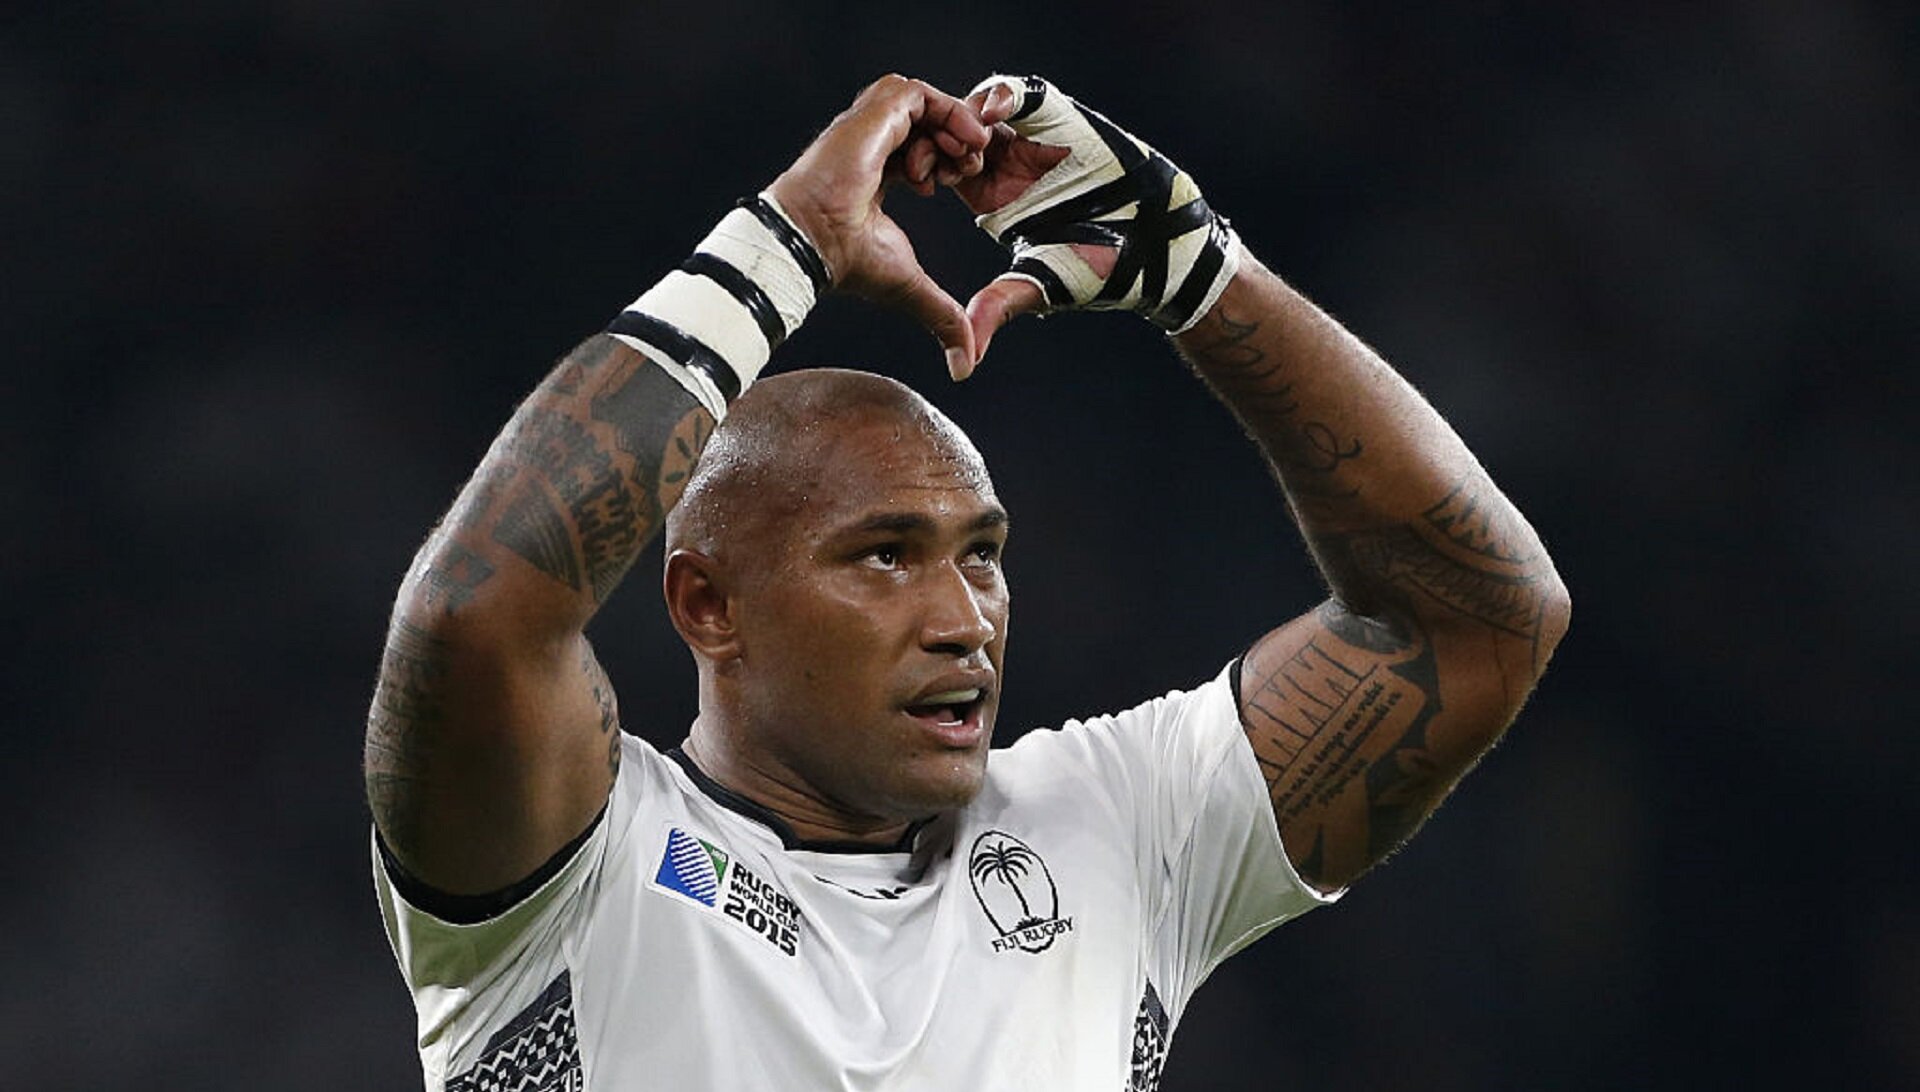 Nemani Nadolo announces retirement from international rugby